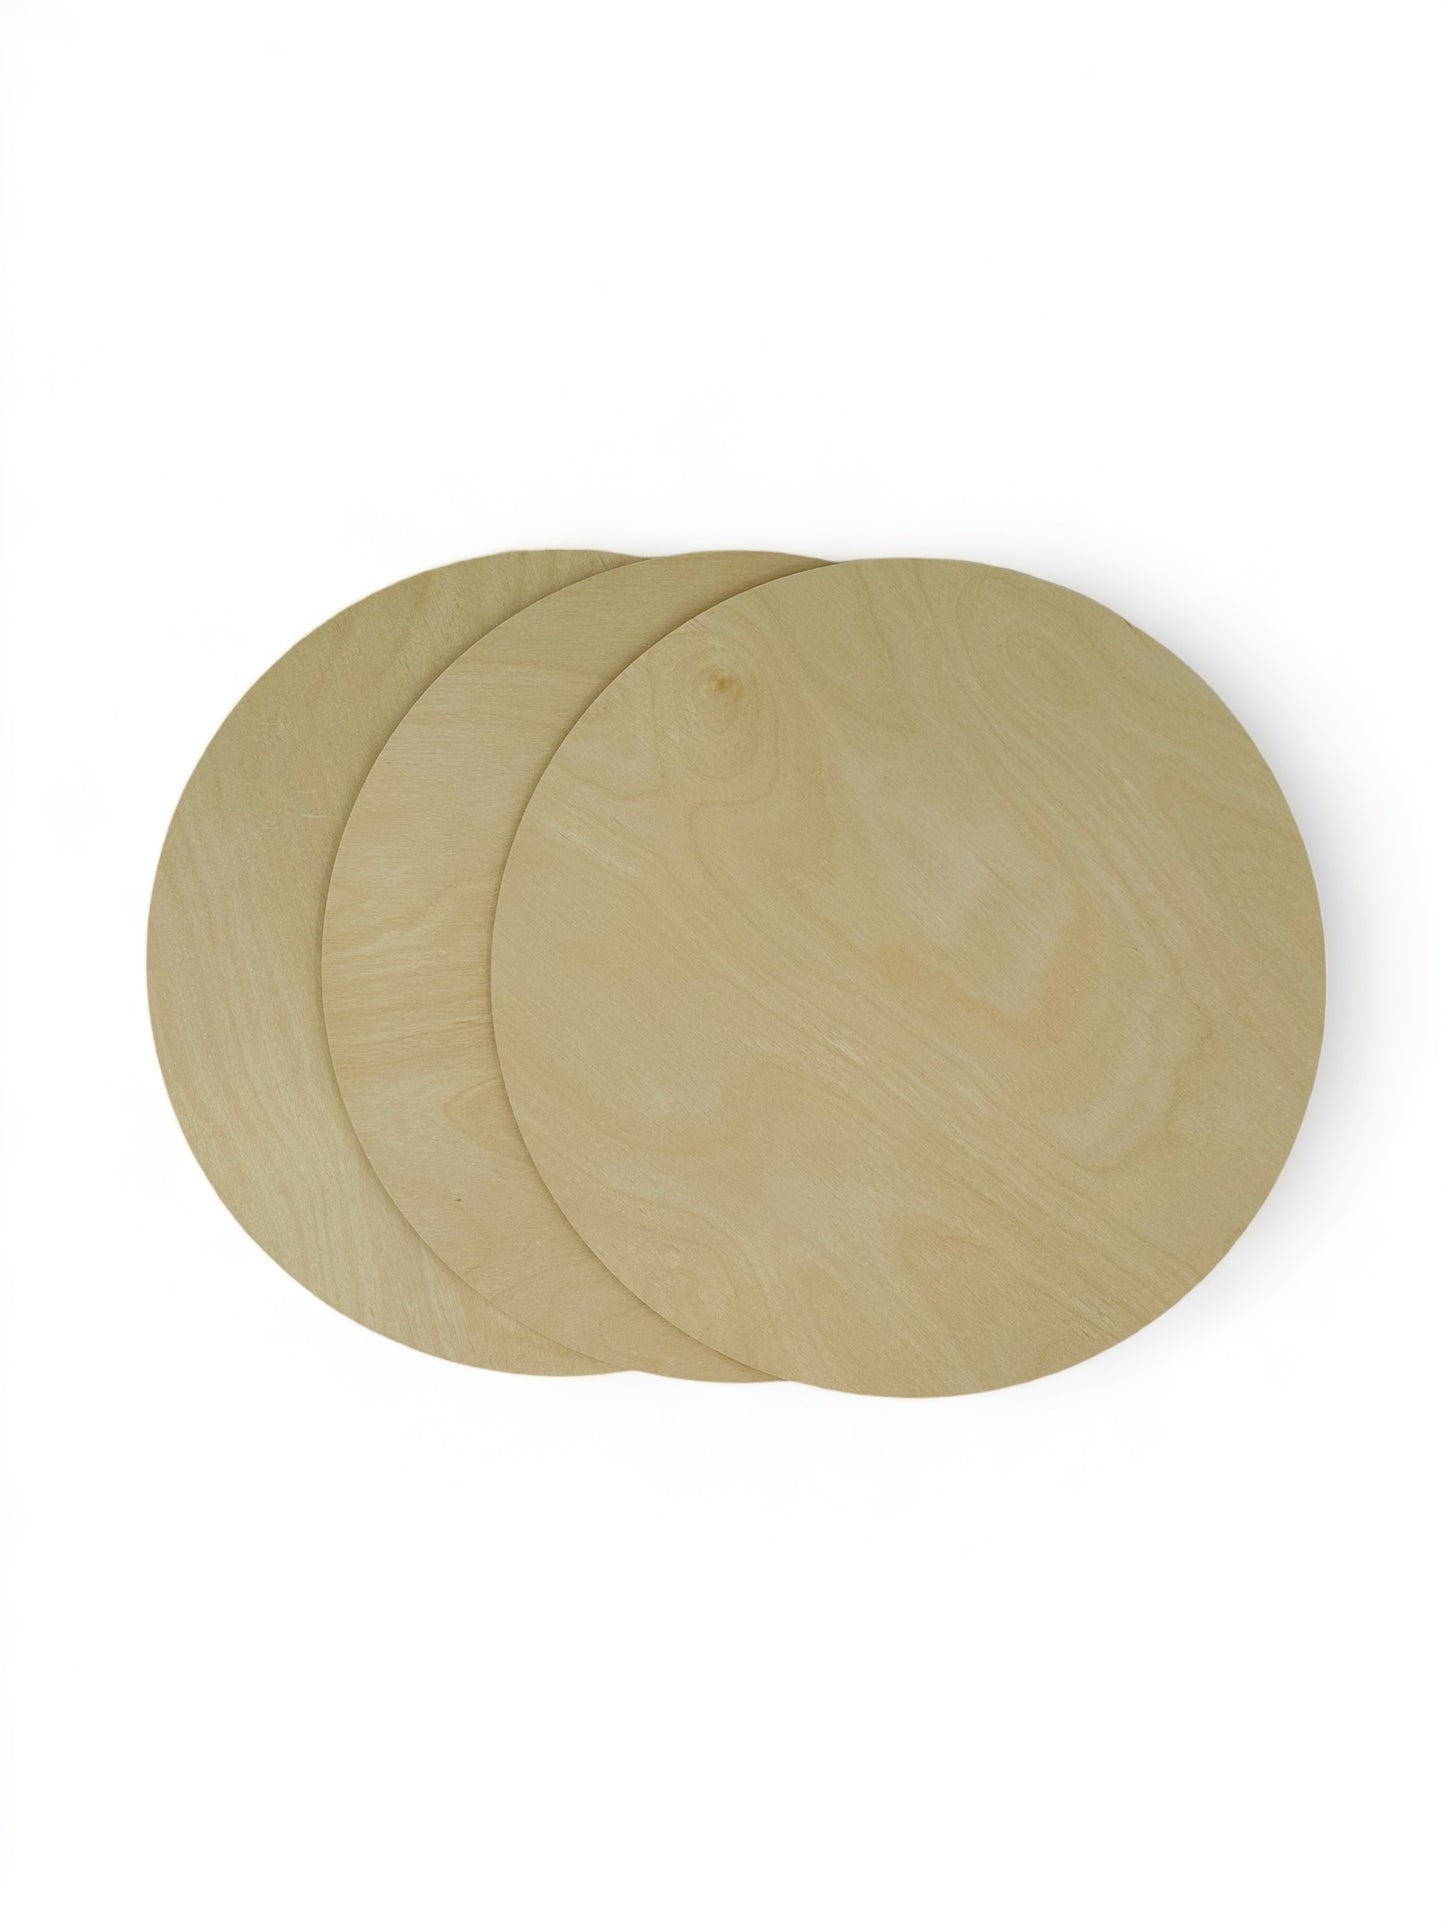 25 Pack -  18 Inch Birch Plywood Wooden Crafting Round Cutouts - 1/4 inch thick